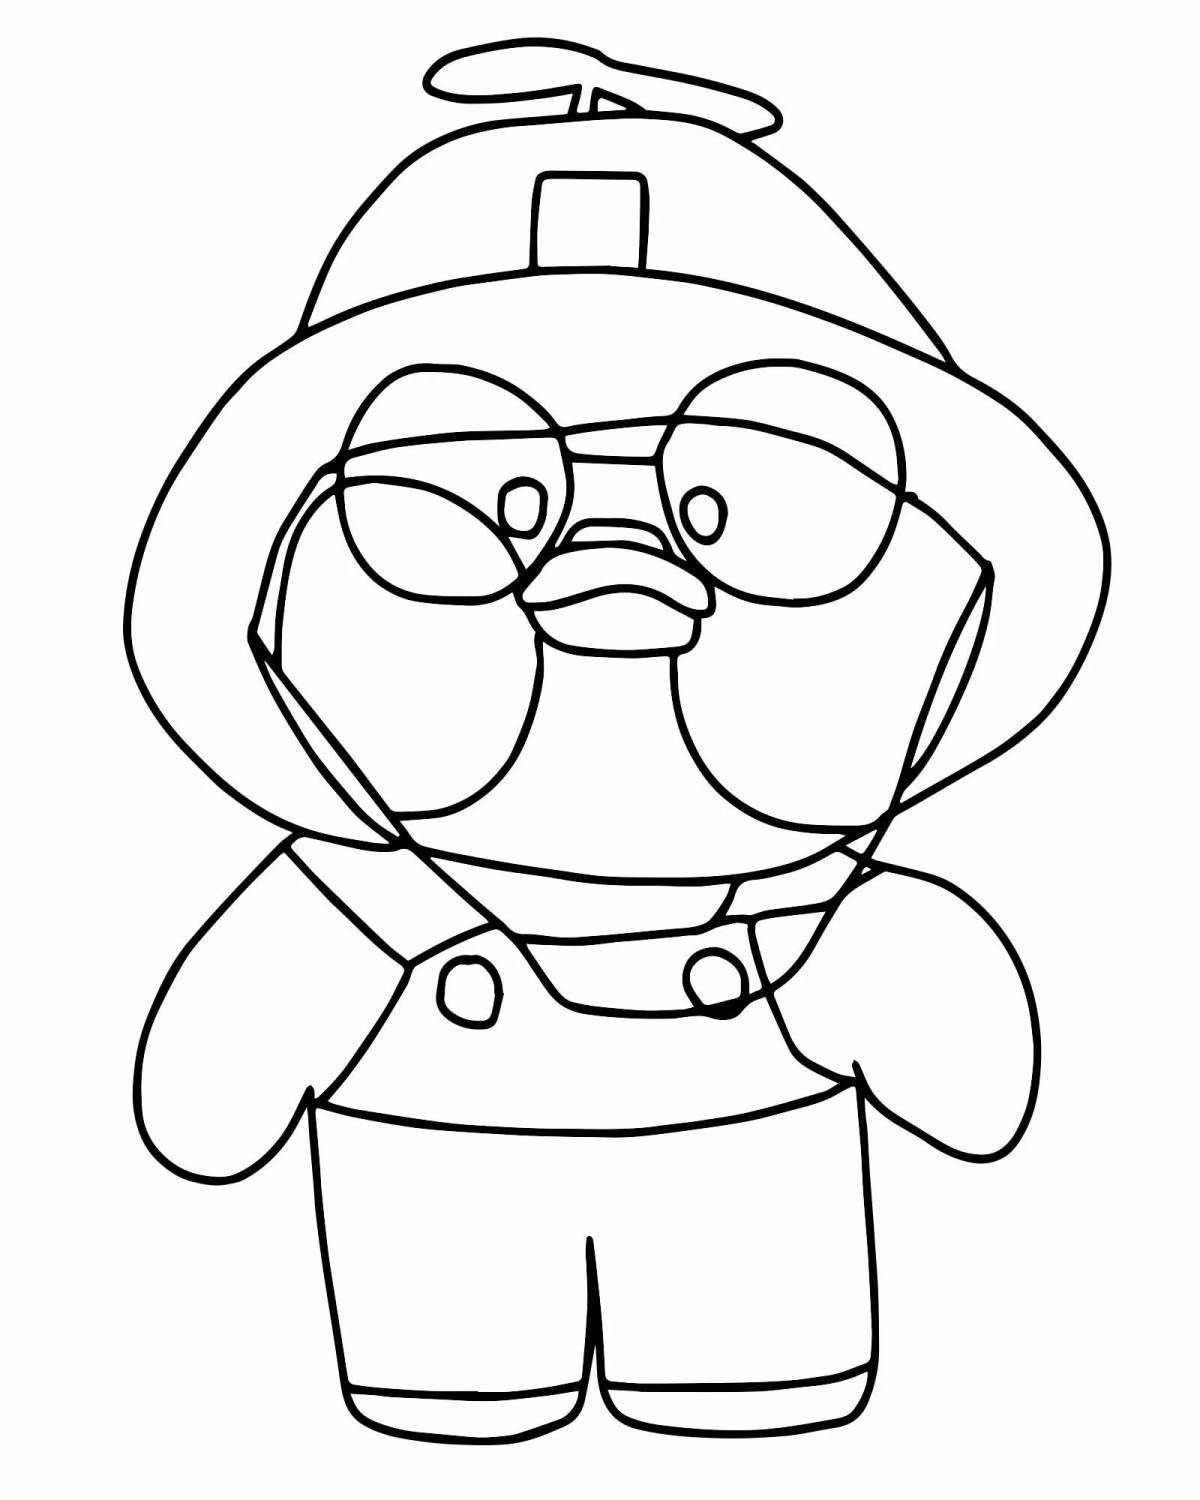 Lalafanfan glossy duck coloring page